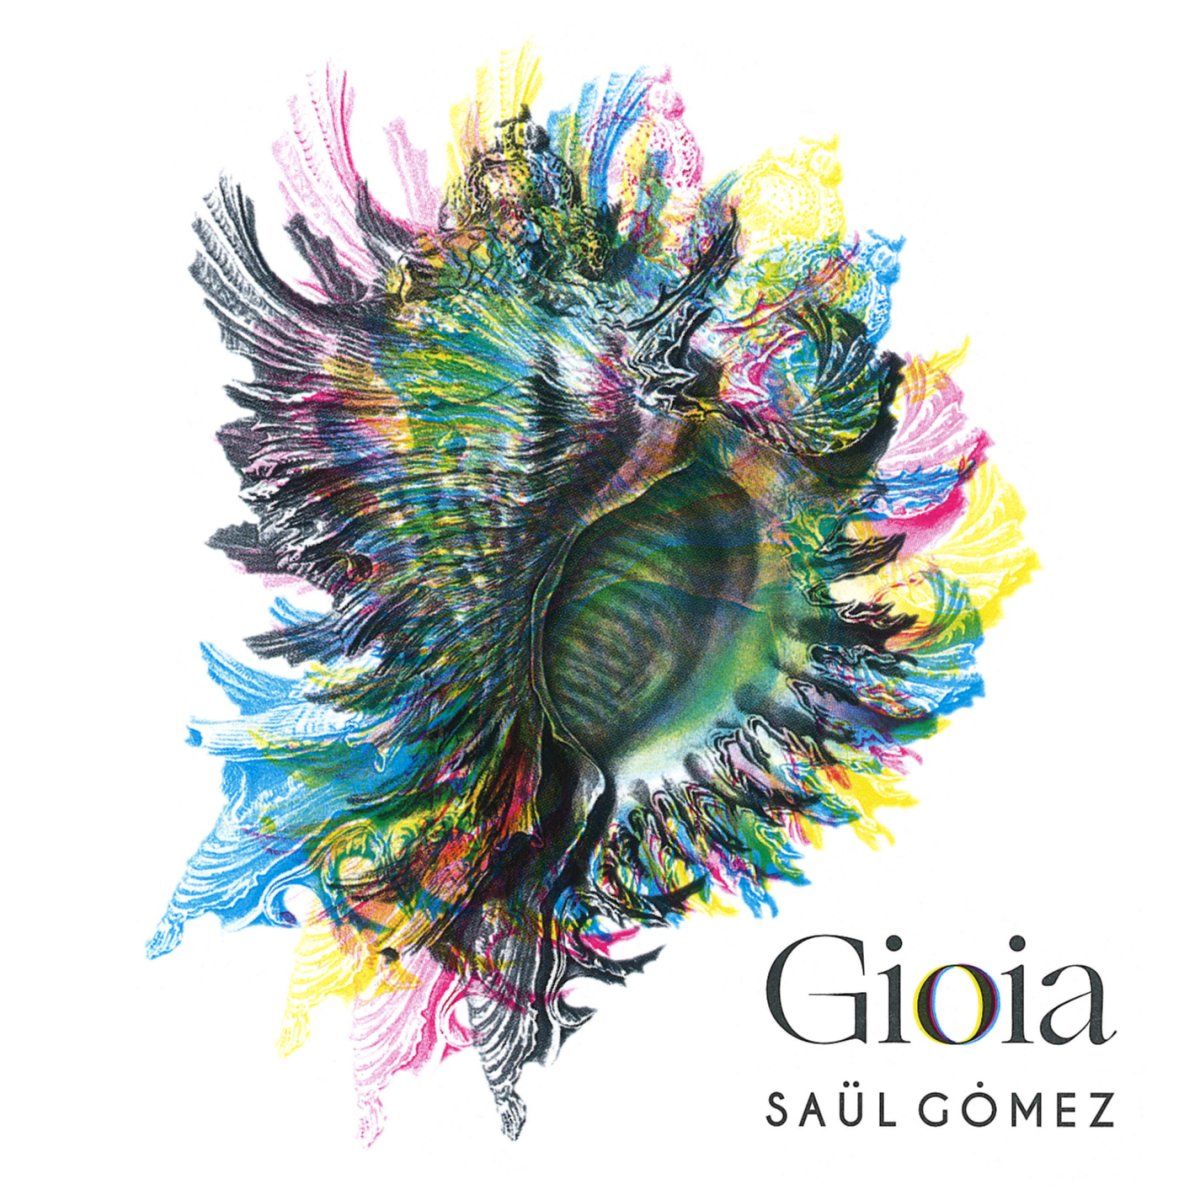 Gioia (New Compositions by Sal Gmez Soler) - clicca qui